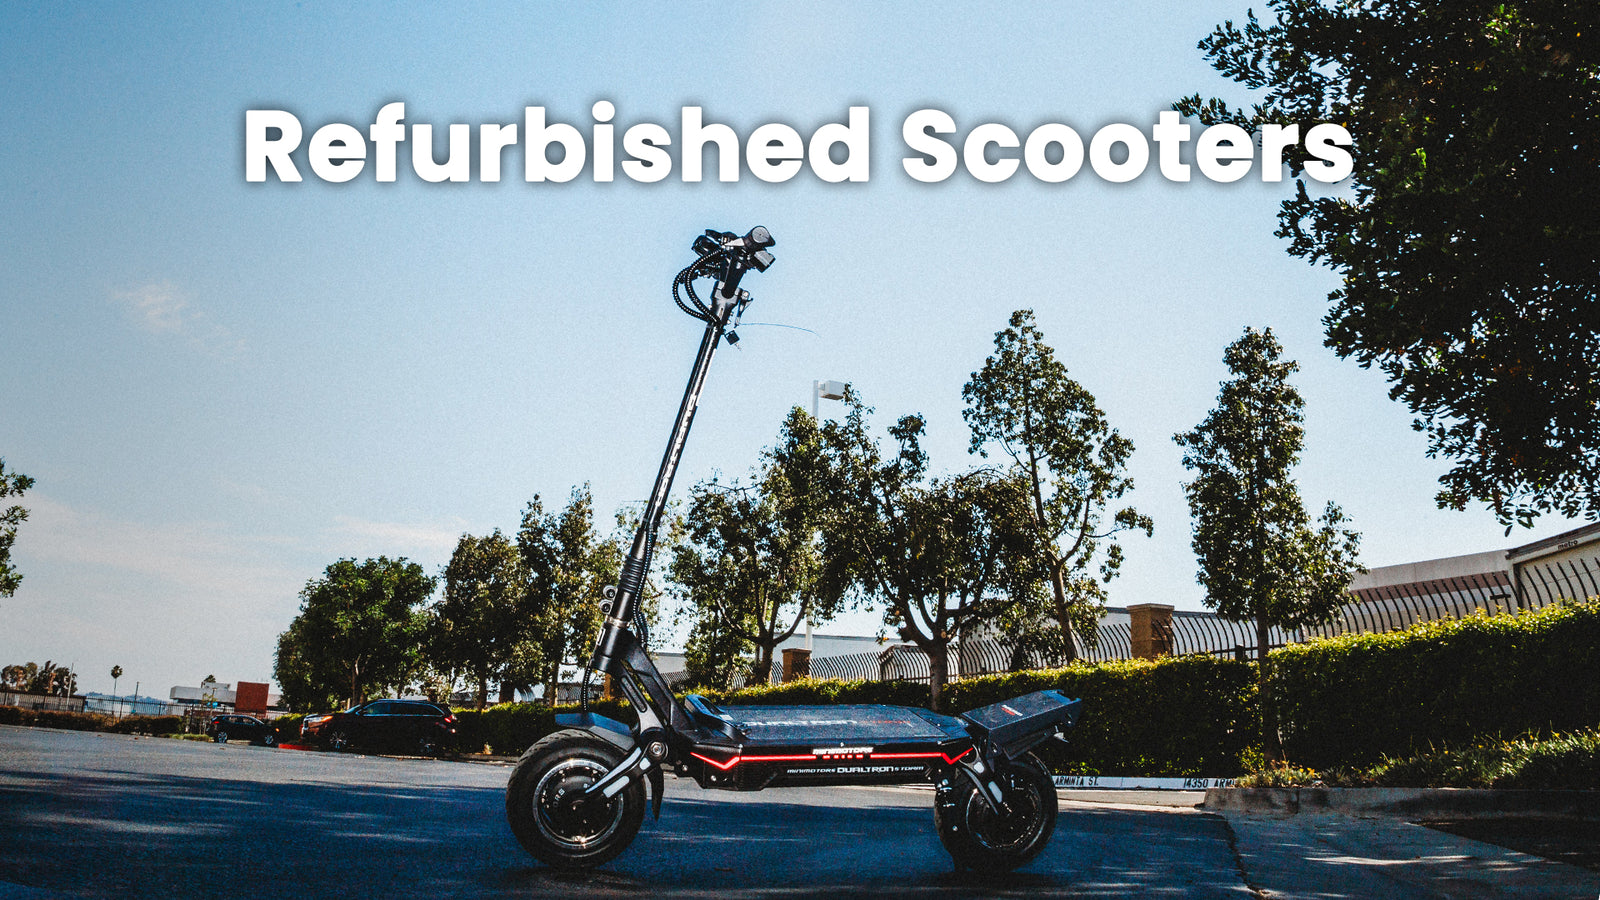 Top 3 reasons why you should buy some of our fastest, longest range electric scooters for up to $500 less